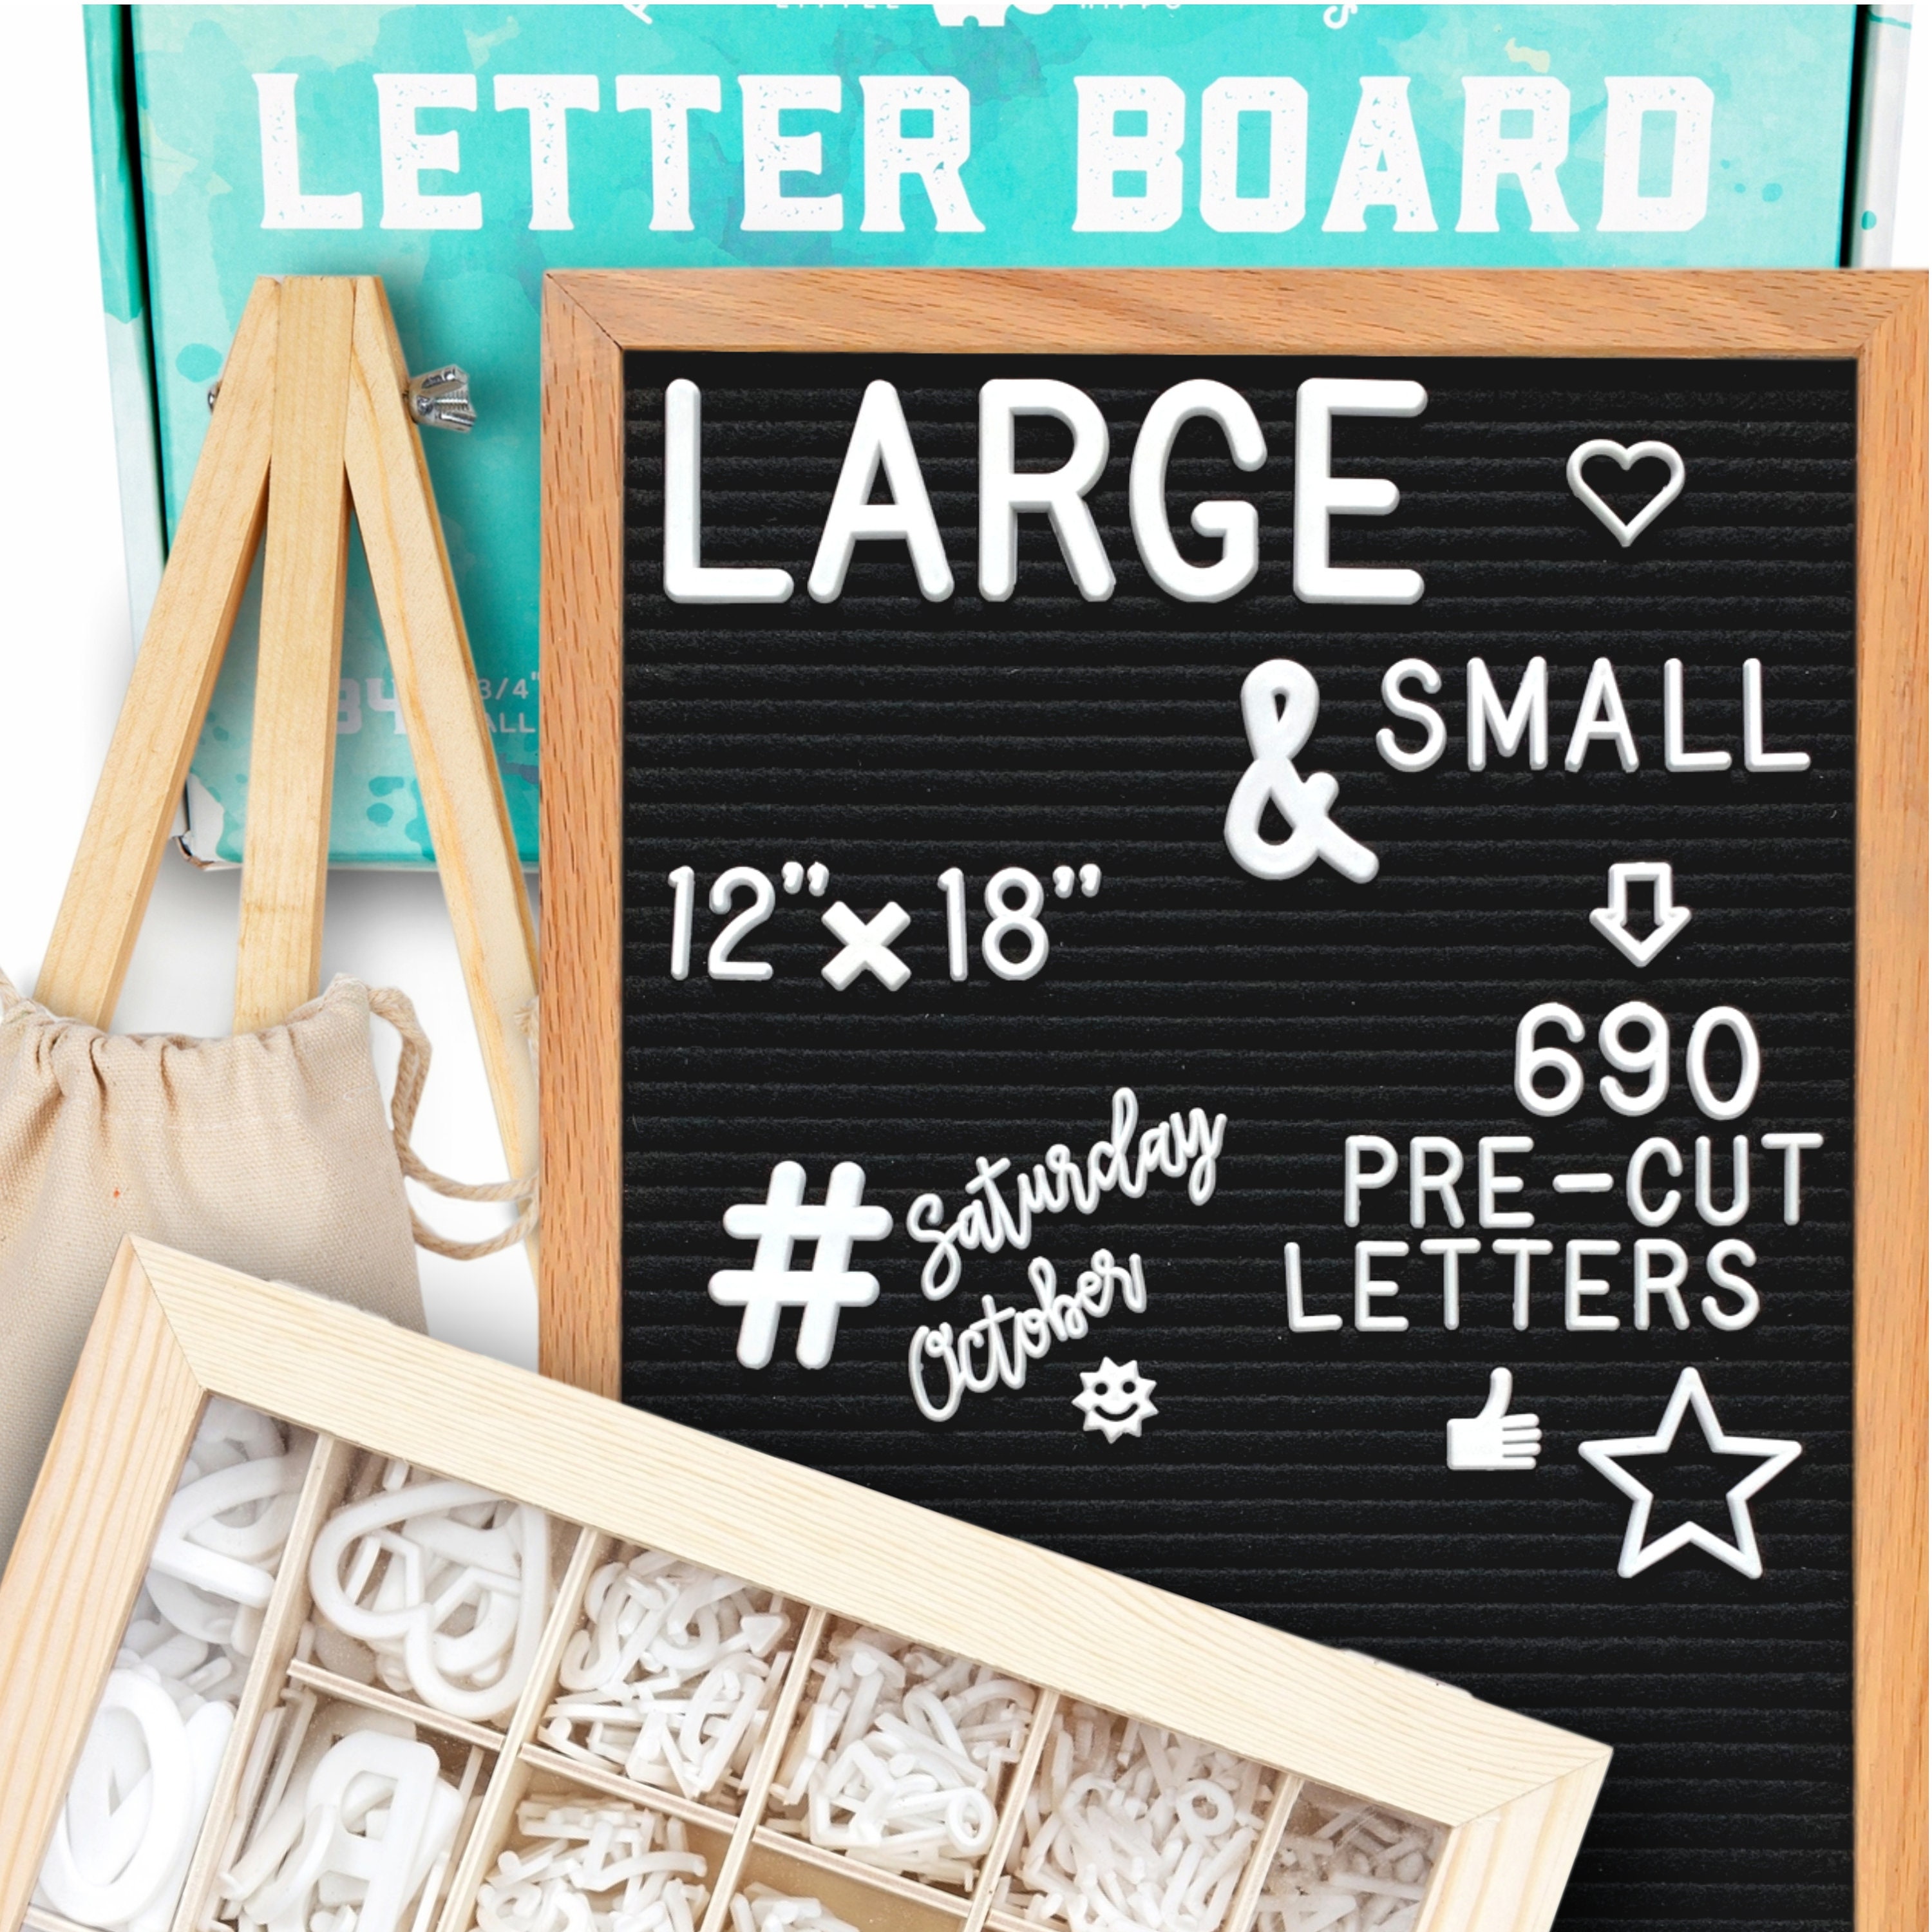 Khaki ColdShine Felt Letter Board 12 x 12 Inch Square Memo Board Oak Message Board with 340 Numbers Letters Easel and Drawstring Bag for Photo Display Home Kitchen Classroom Decor 